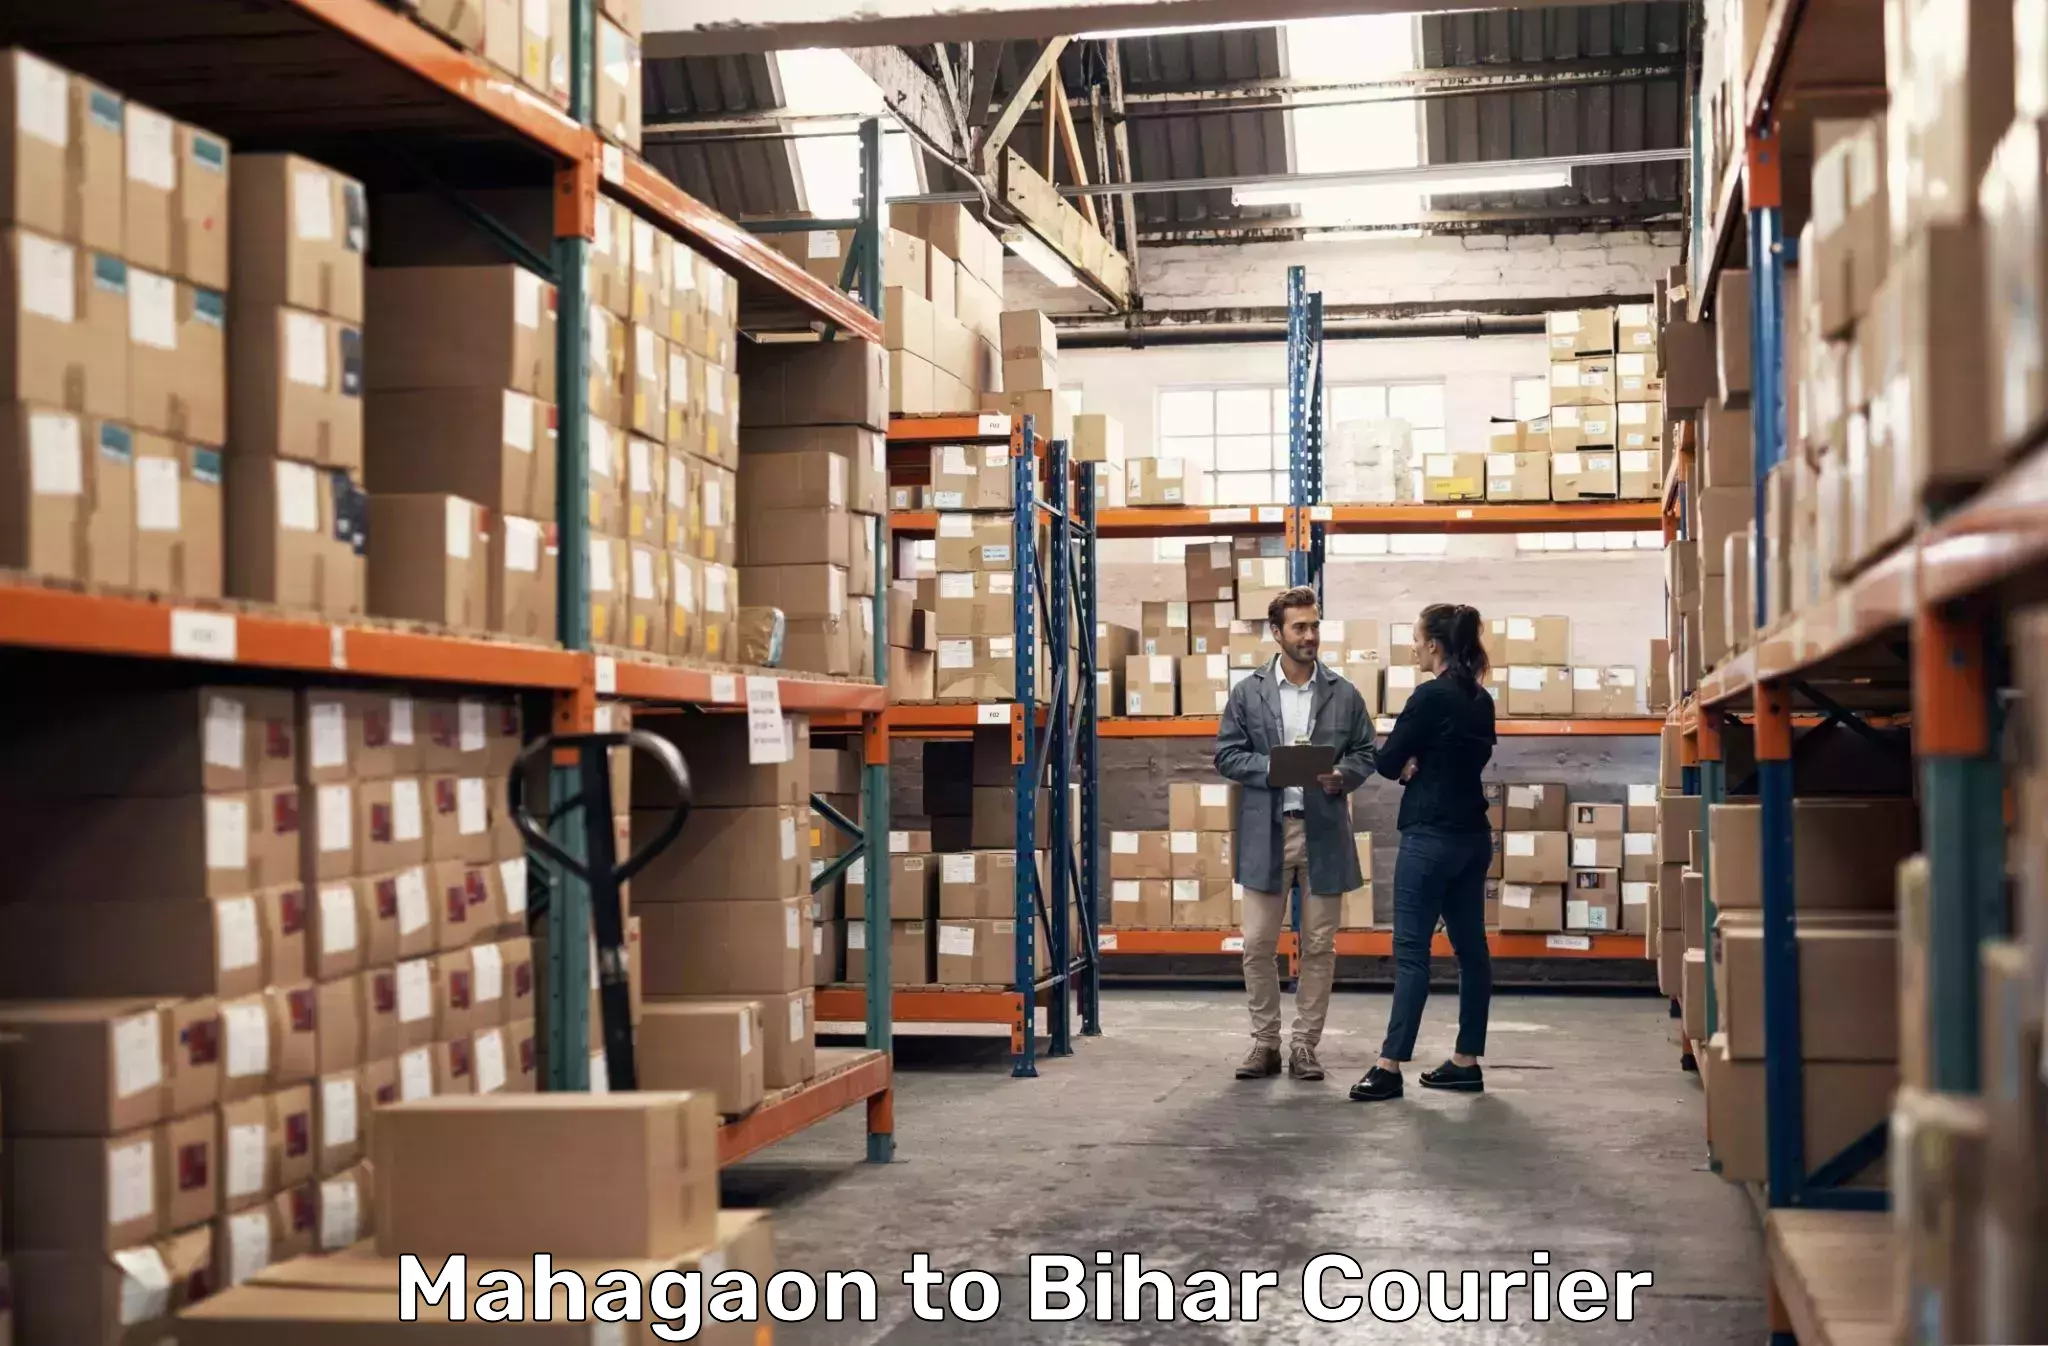 Cash on delivery service Mahagaon to Biraul